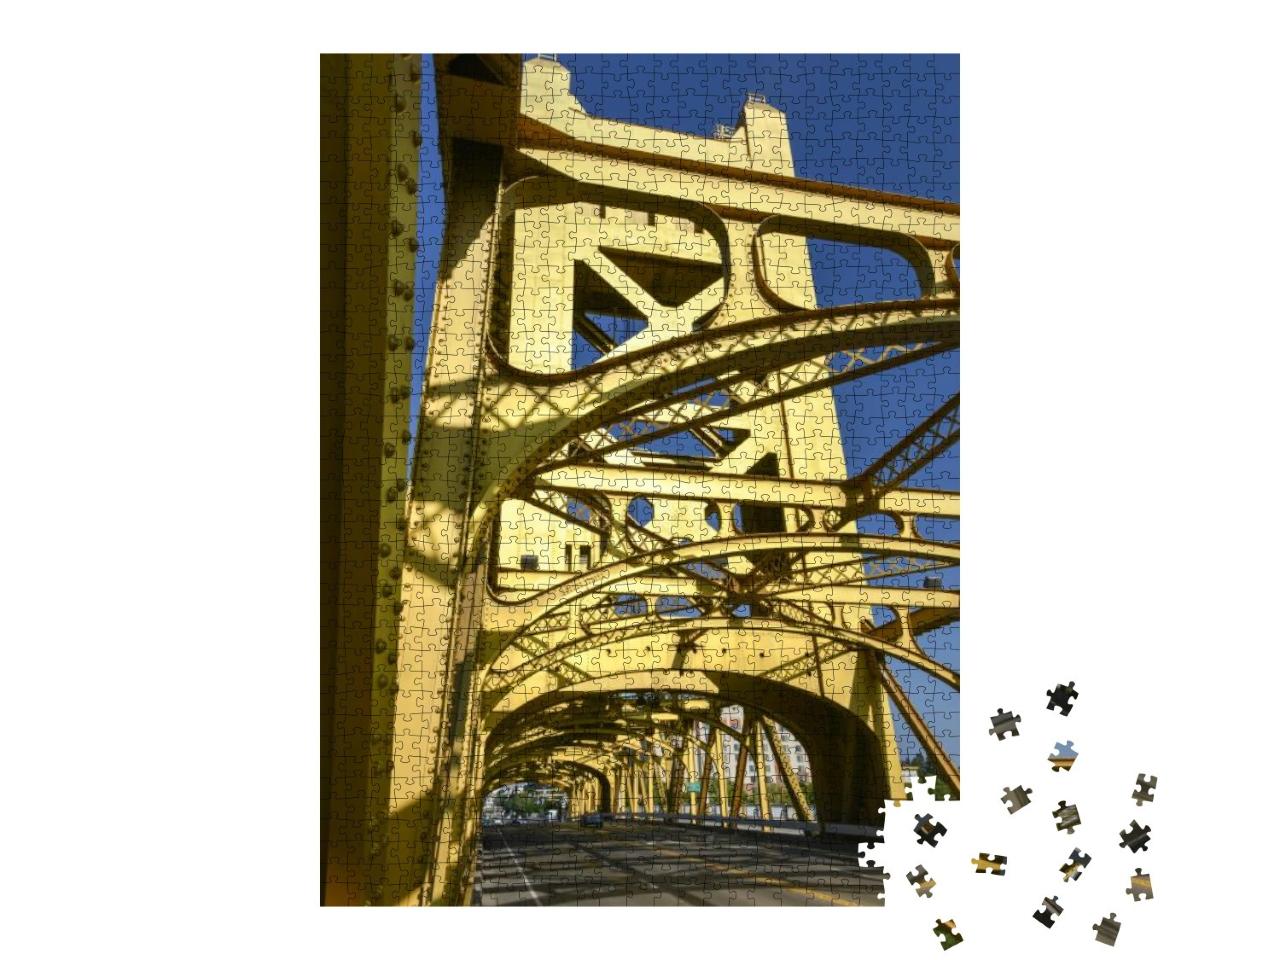 The Tower Bridge 1935 is a Vertical Lift Bridge that Cros... Jigsaw Puzzle with 1000 pieces